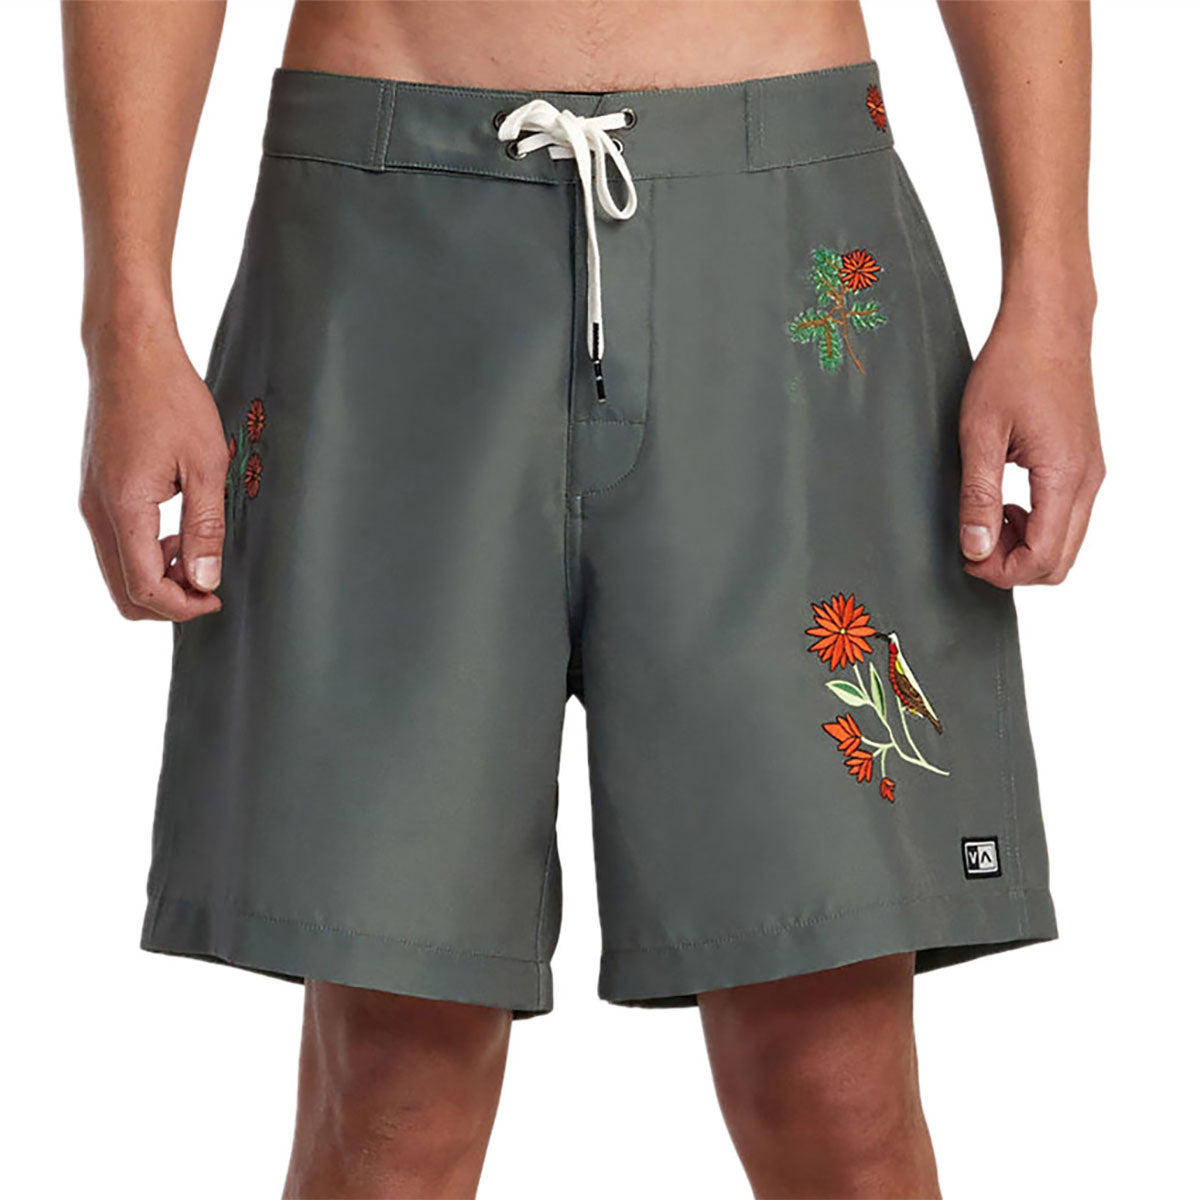 RVCA Anytime Board Shorts - Olive image 2